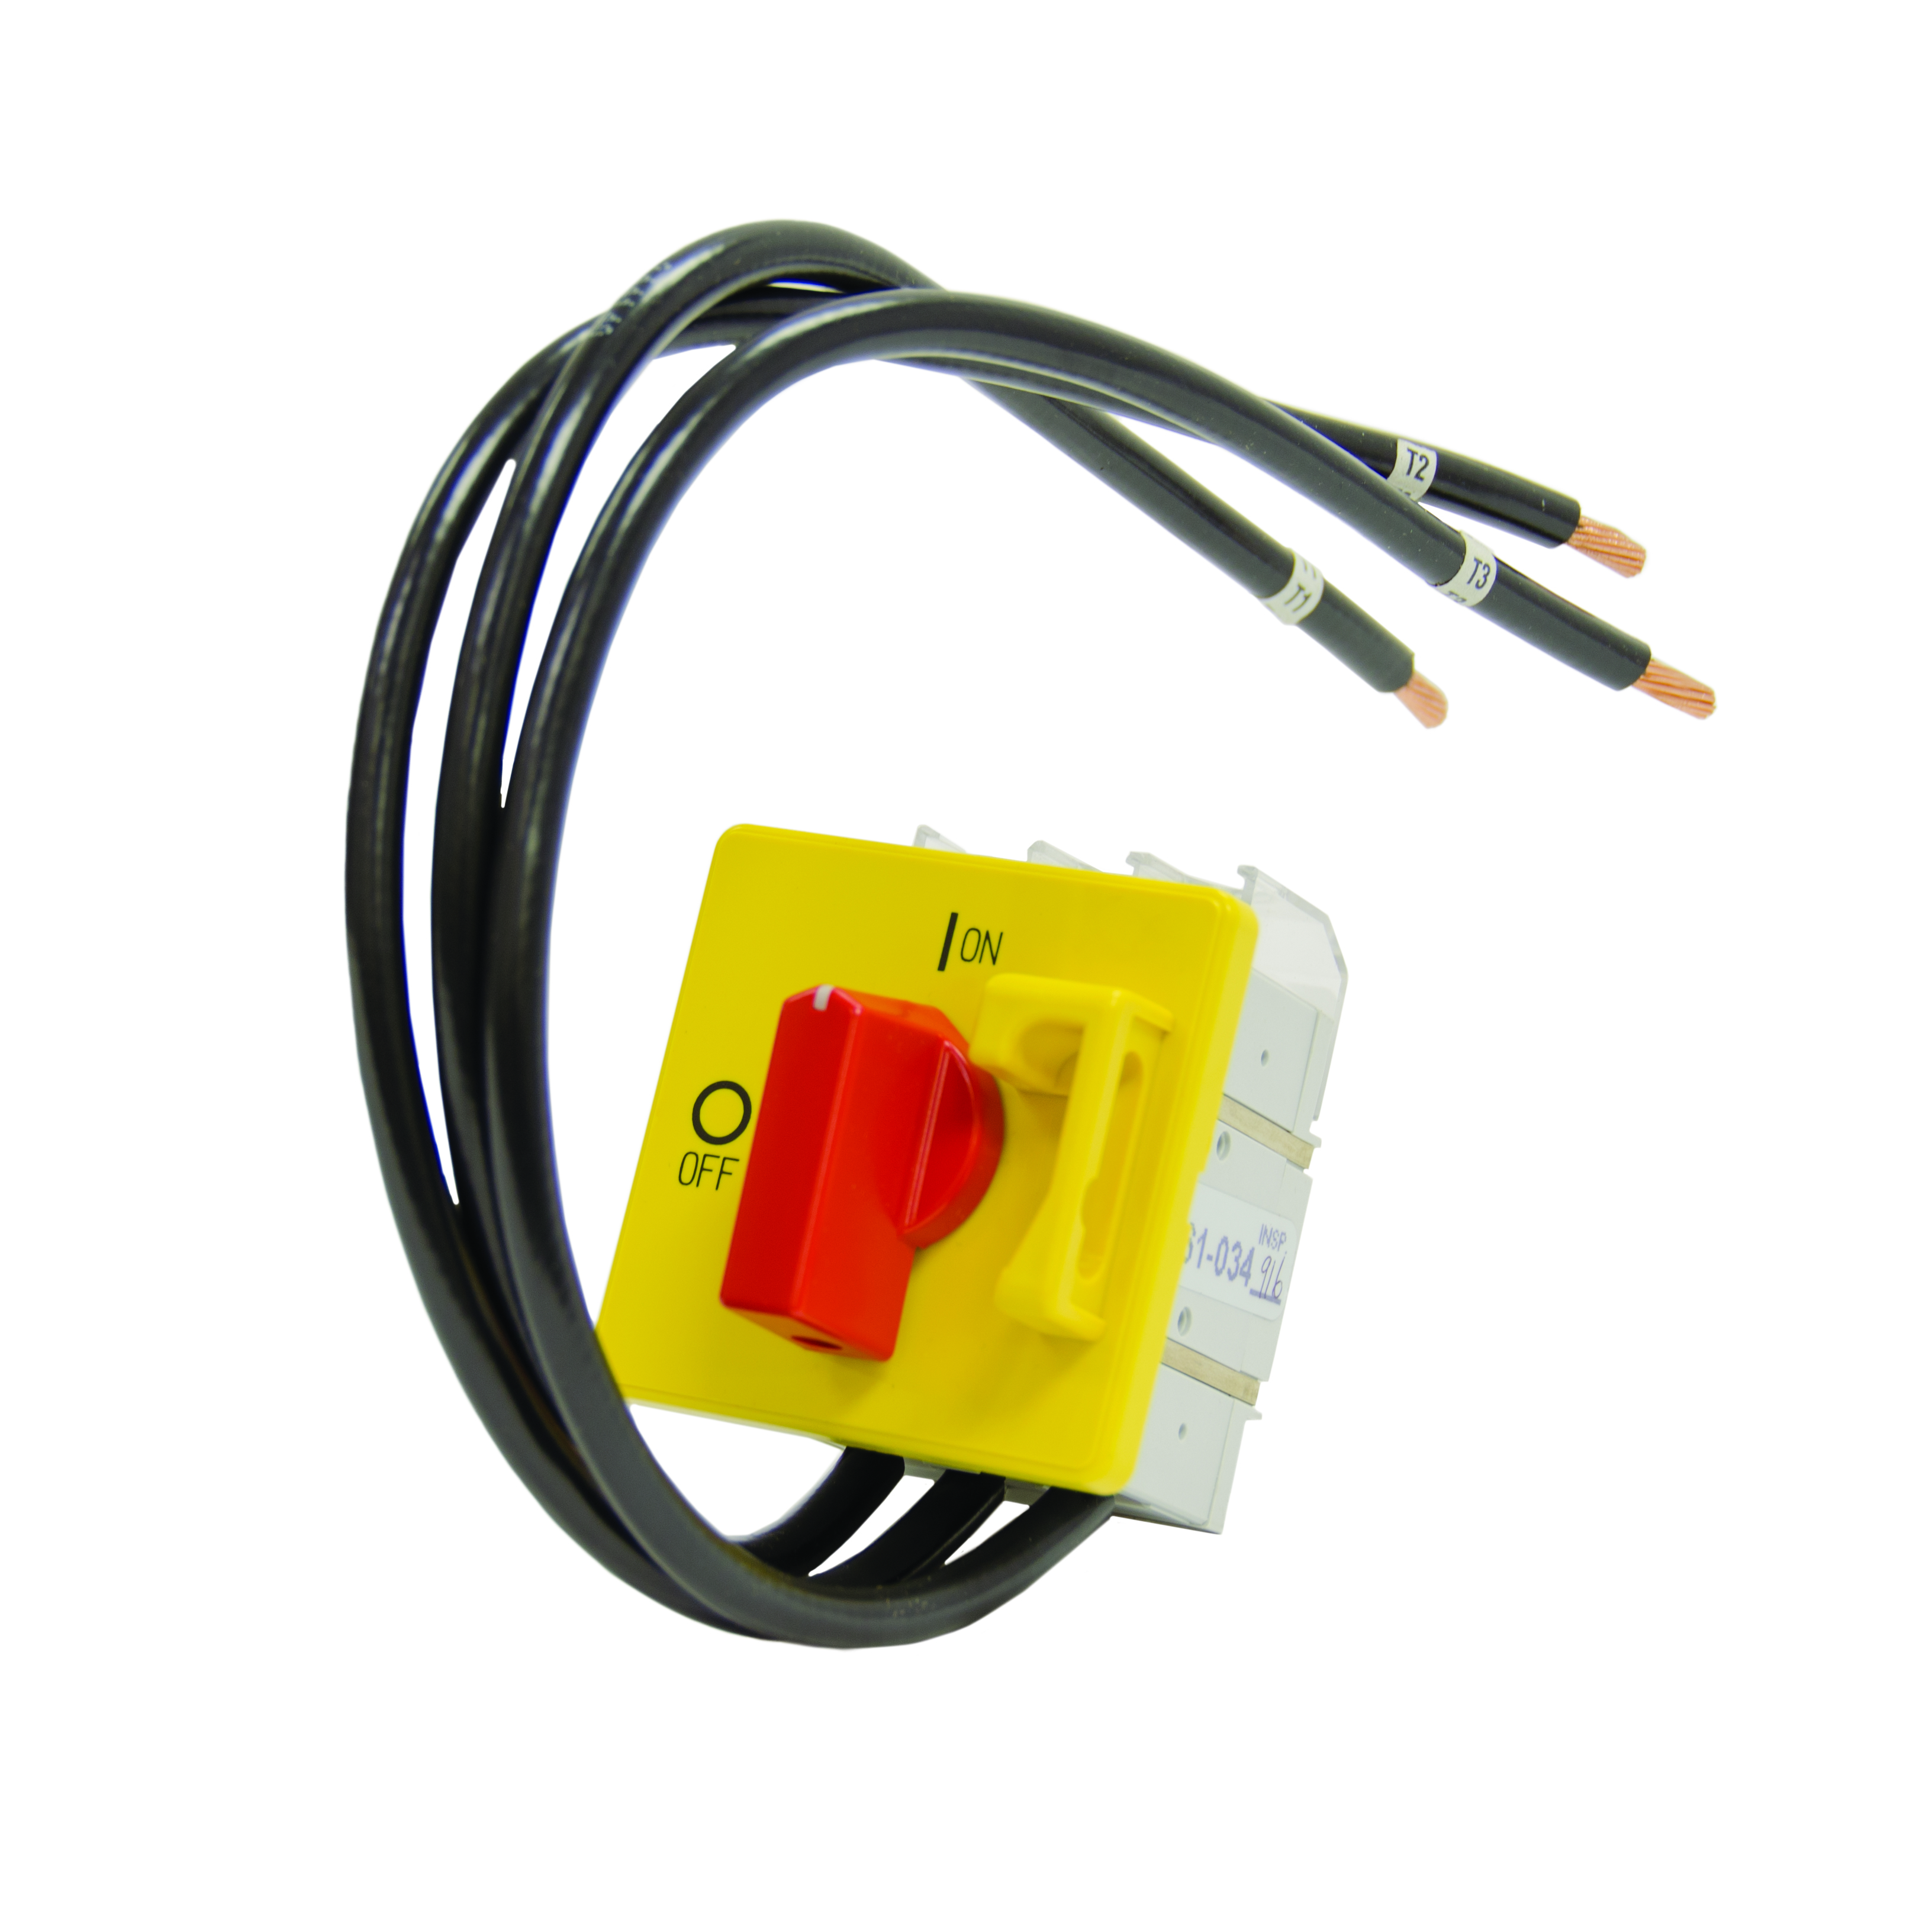 Disconnect Switch, 120 - 600 VAC, 60 AMP, 3 Poles. For Use With 5100 Series Horizontal or Vertical Mounted Fan Forced Unit Heater